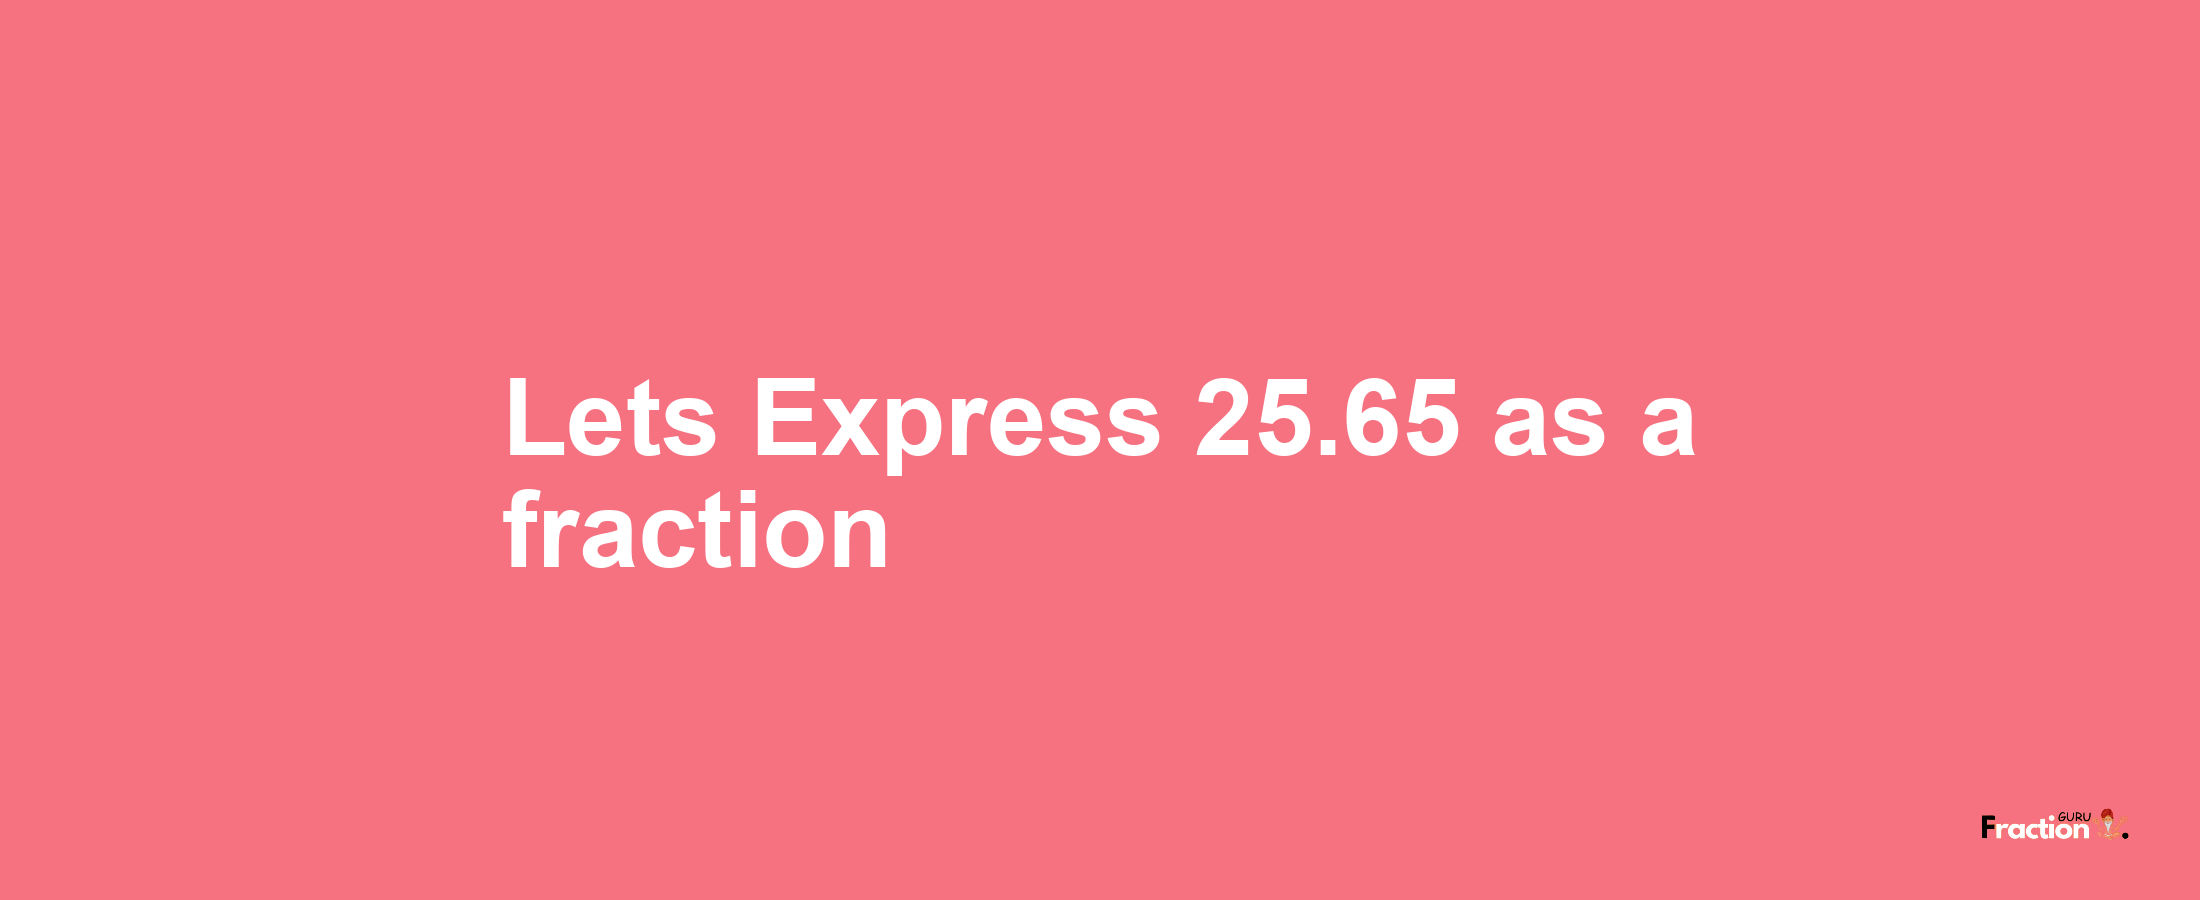 Lets Express 25.65 as afraction